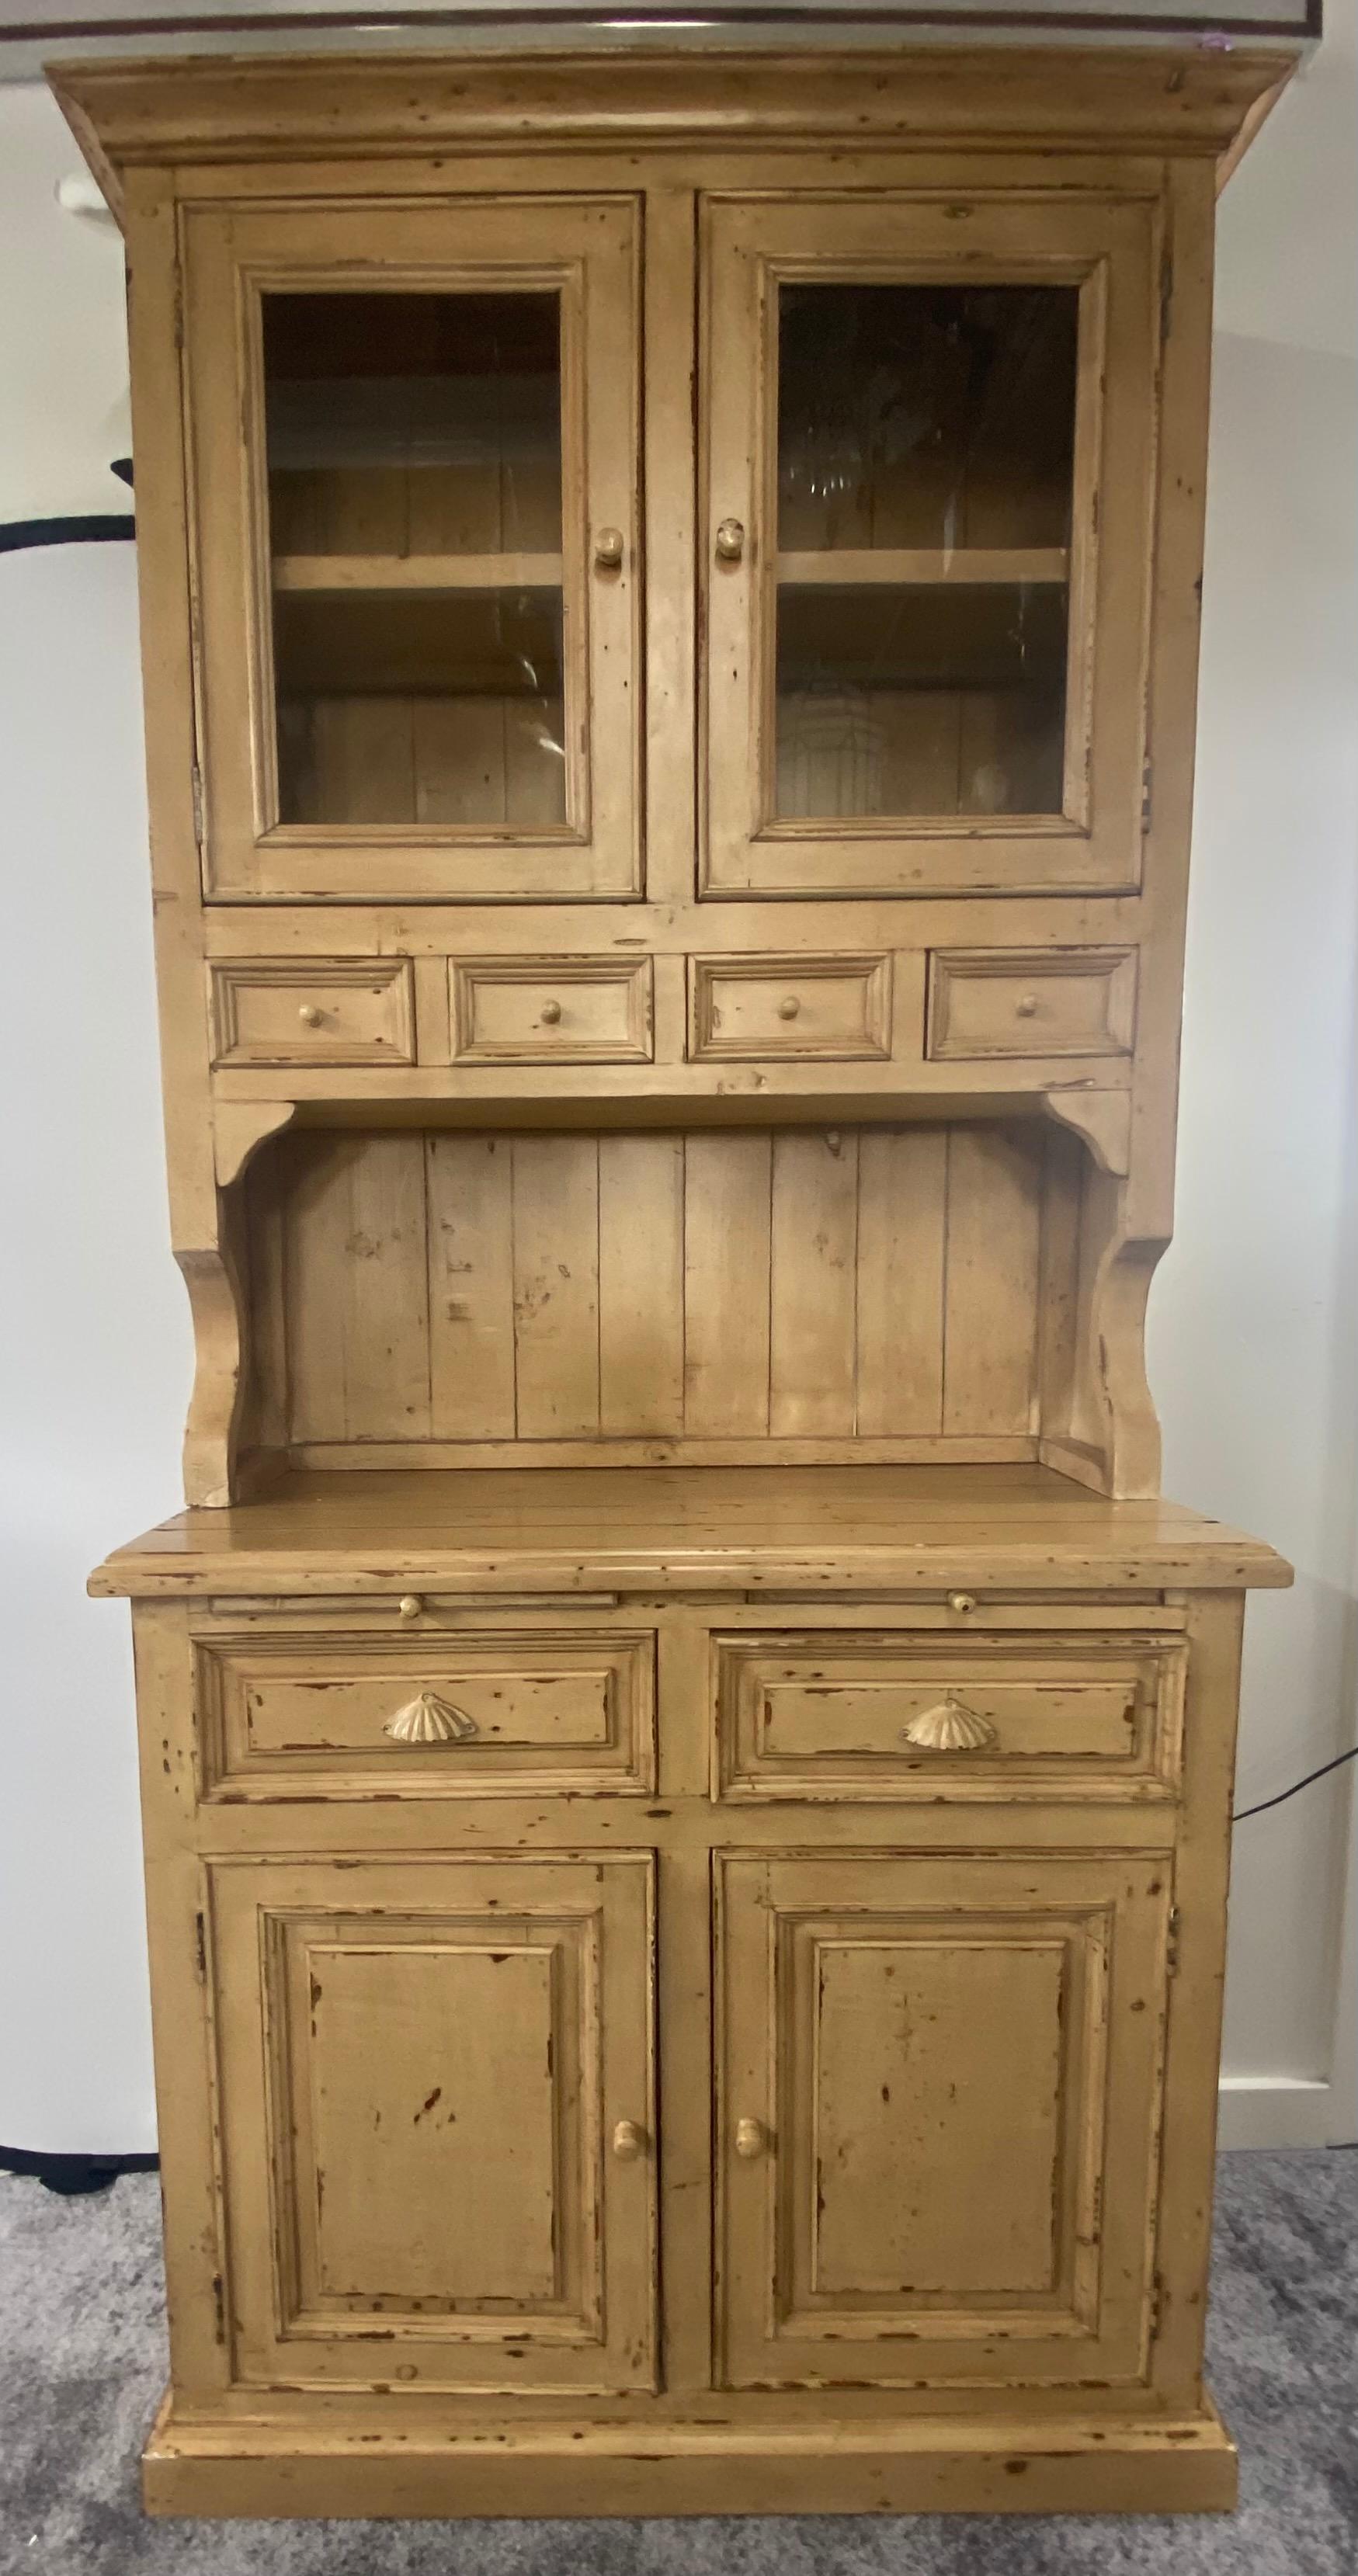 20th Century Antique French Farm Style Cabinet with Hutch in Off-White/ Beige